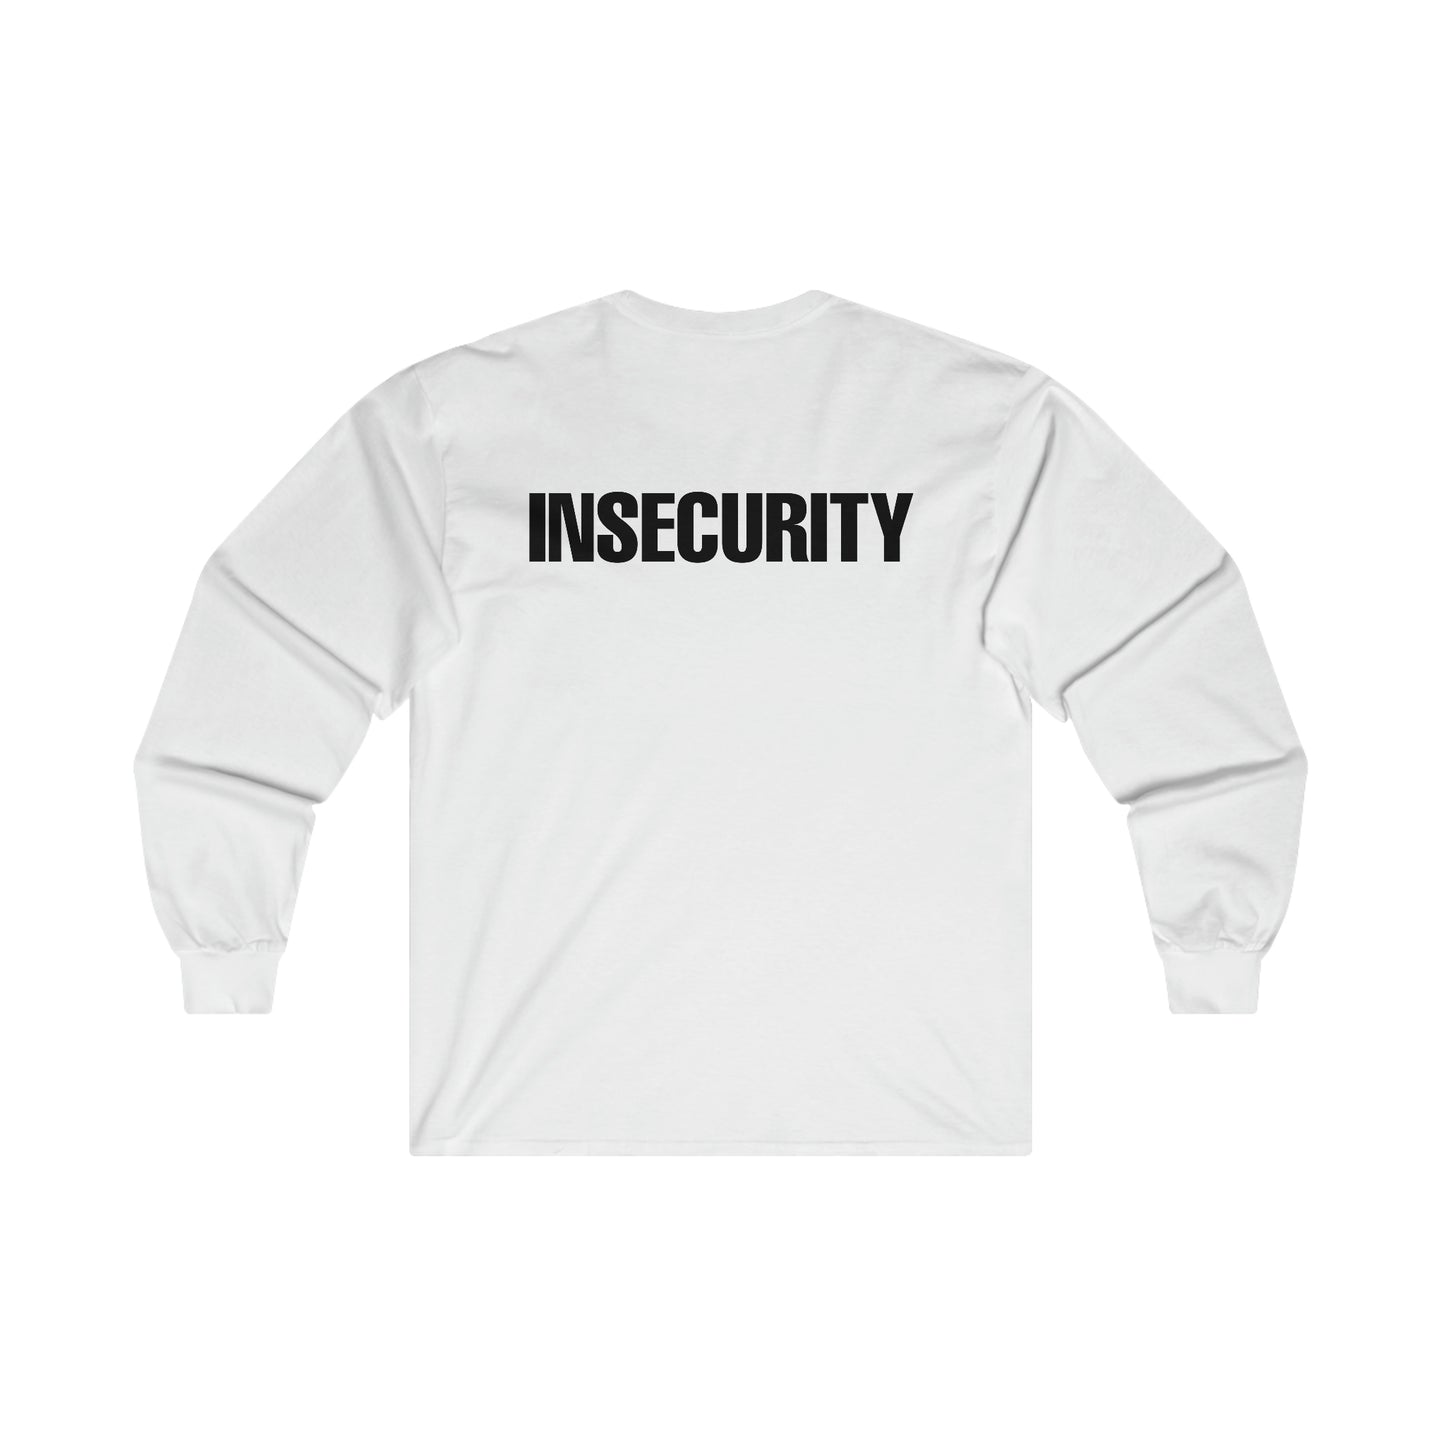 Insecurity Unisex T-Shirt